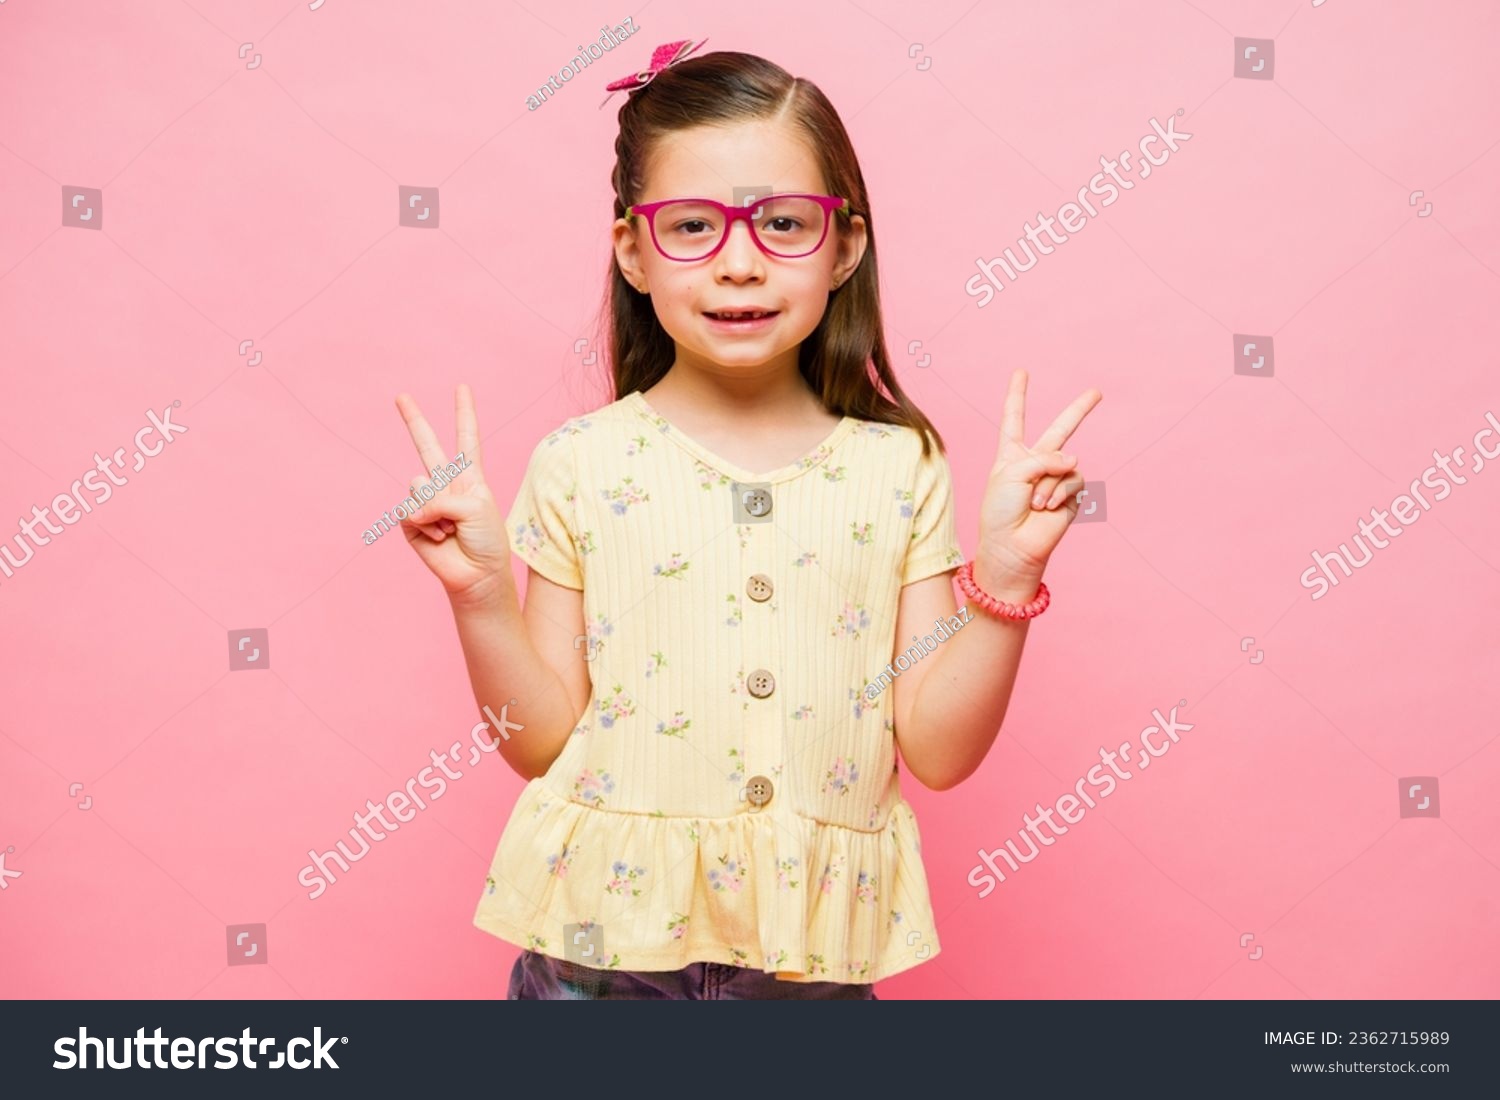 Cheerful little girl making the peace sign and having fun playing while smiling looking happy in a pink studio background #2362715989